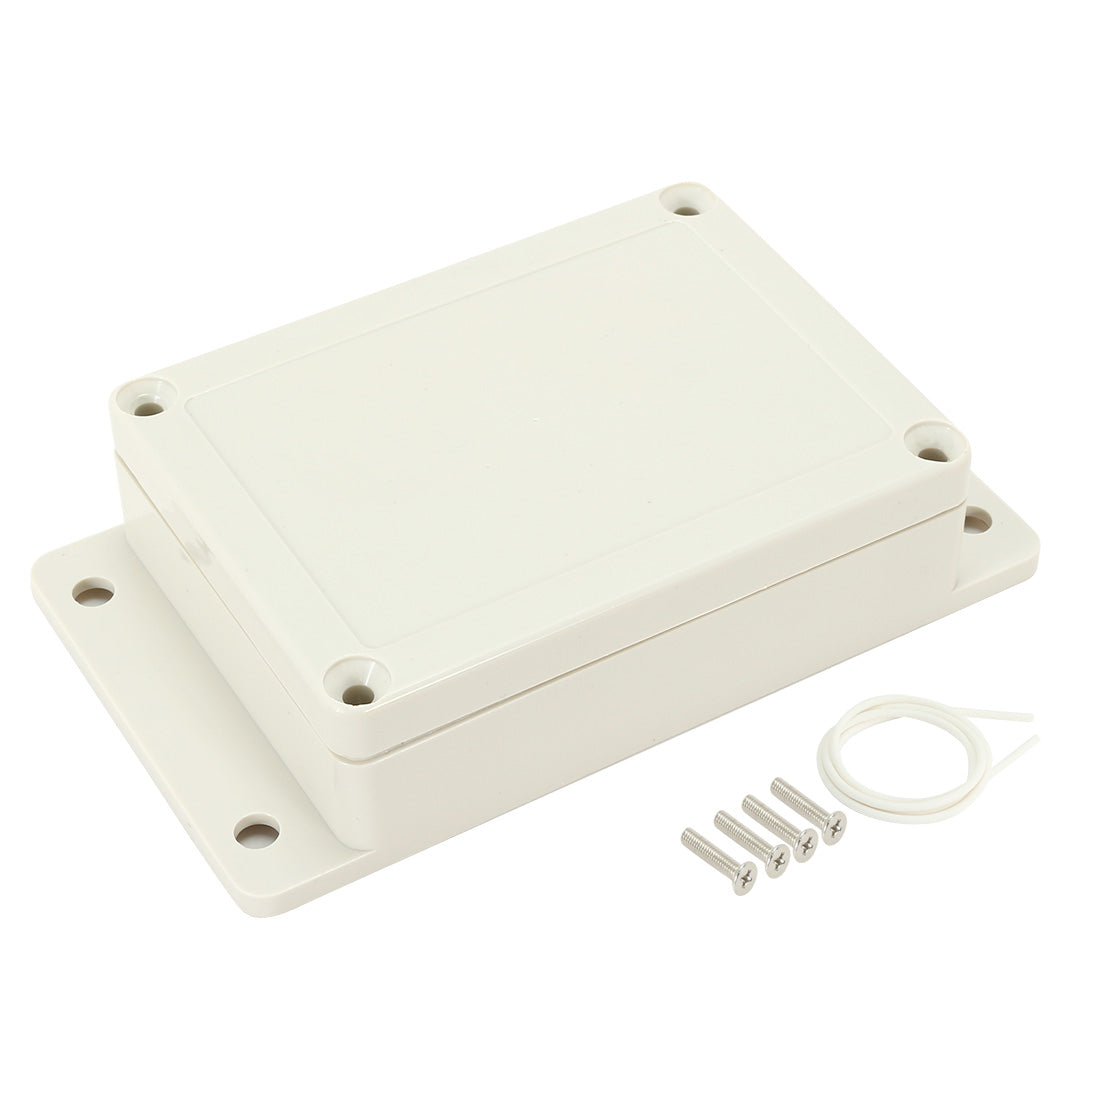 uxcell Uxcell 4.53"x3.35"x1.37"(115mmx85mmx35mm) ABS Junction Box Universal Electric Project Enclosure w Fixed Ear